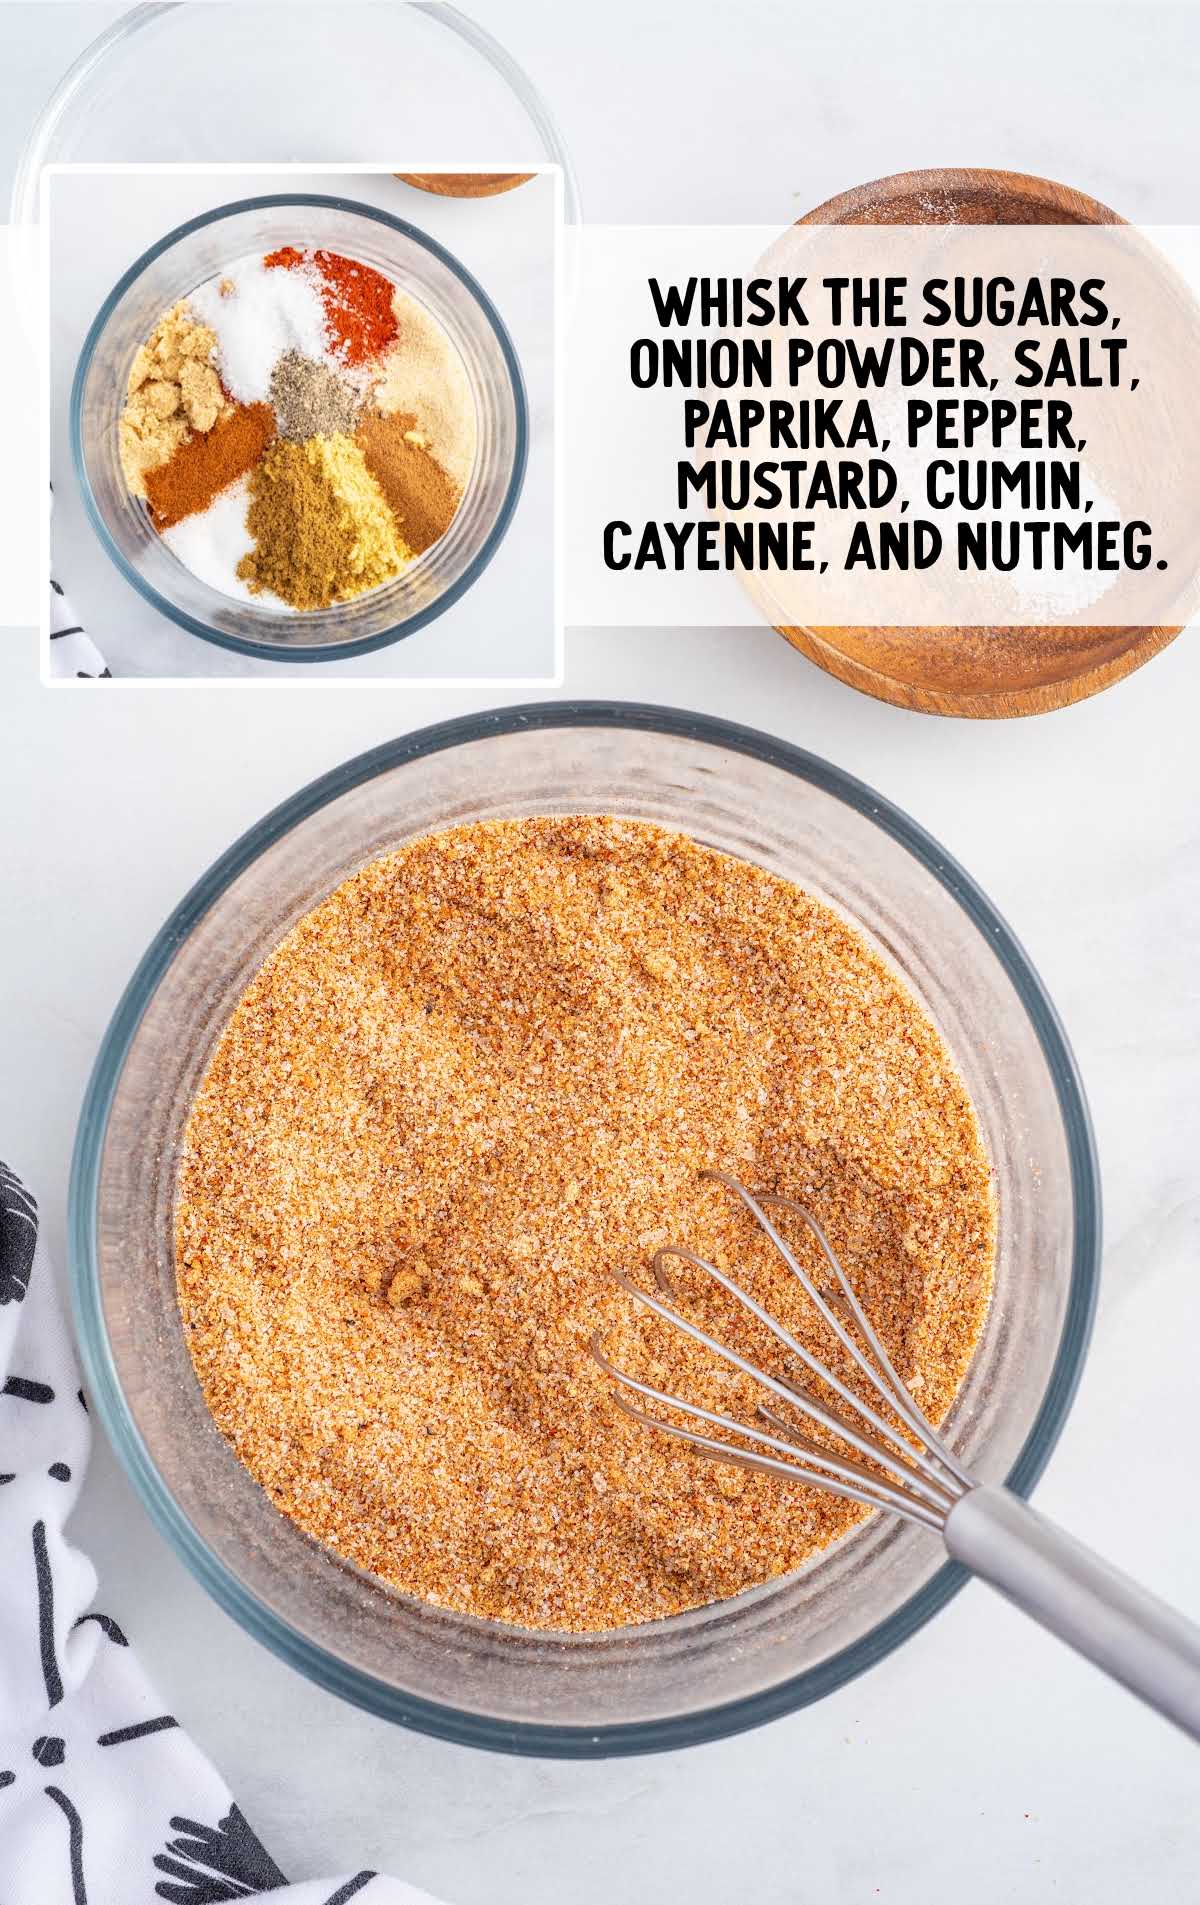 sugar, onion powder, salt, paprika, pepper, mustard, cumin, cayenne and nutmeg whisked together in a bowl